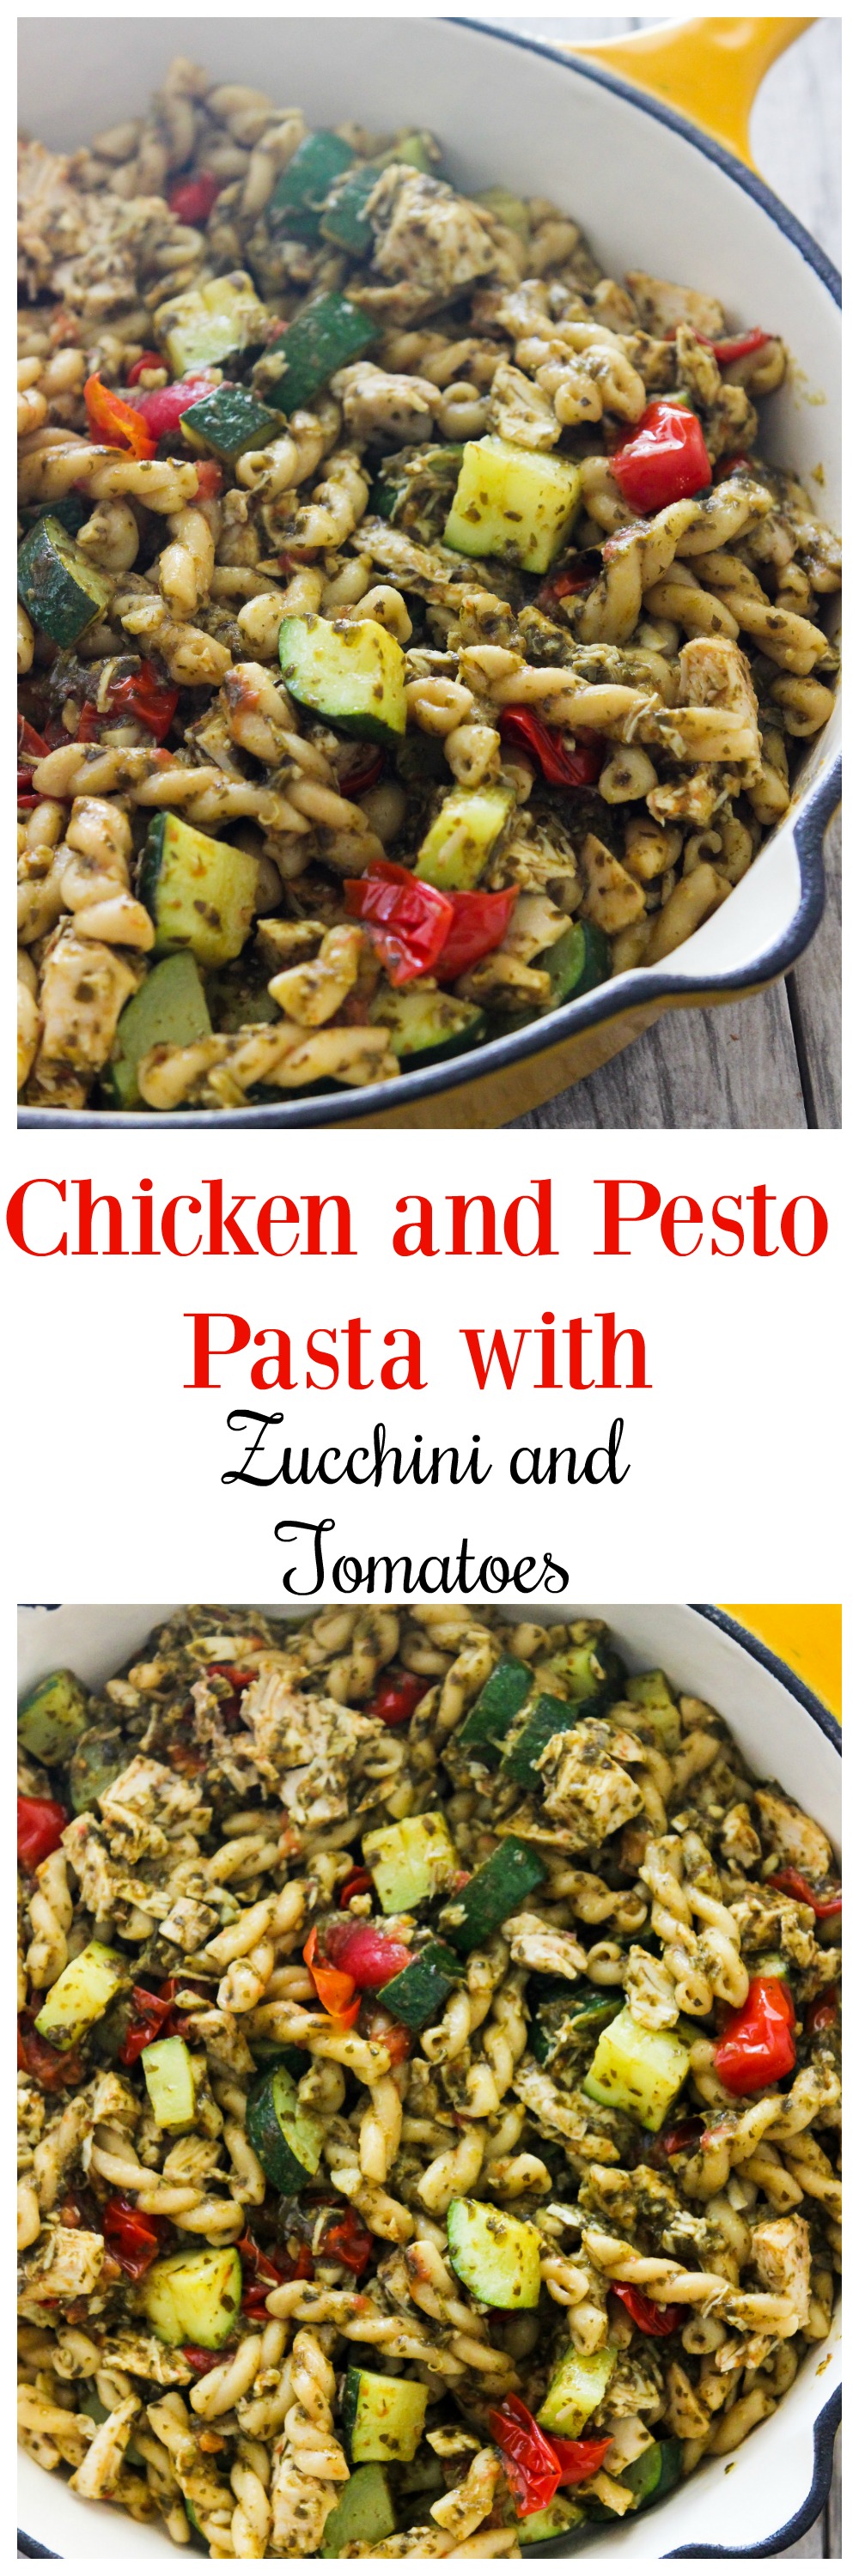 Chicken and Pesto Pasta with Zucchini and Tomatoes 